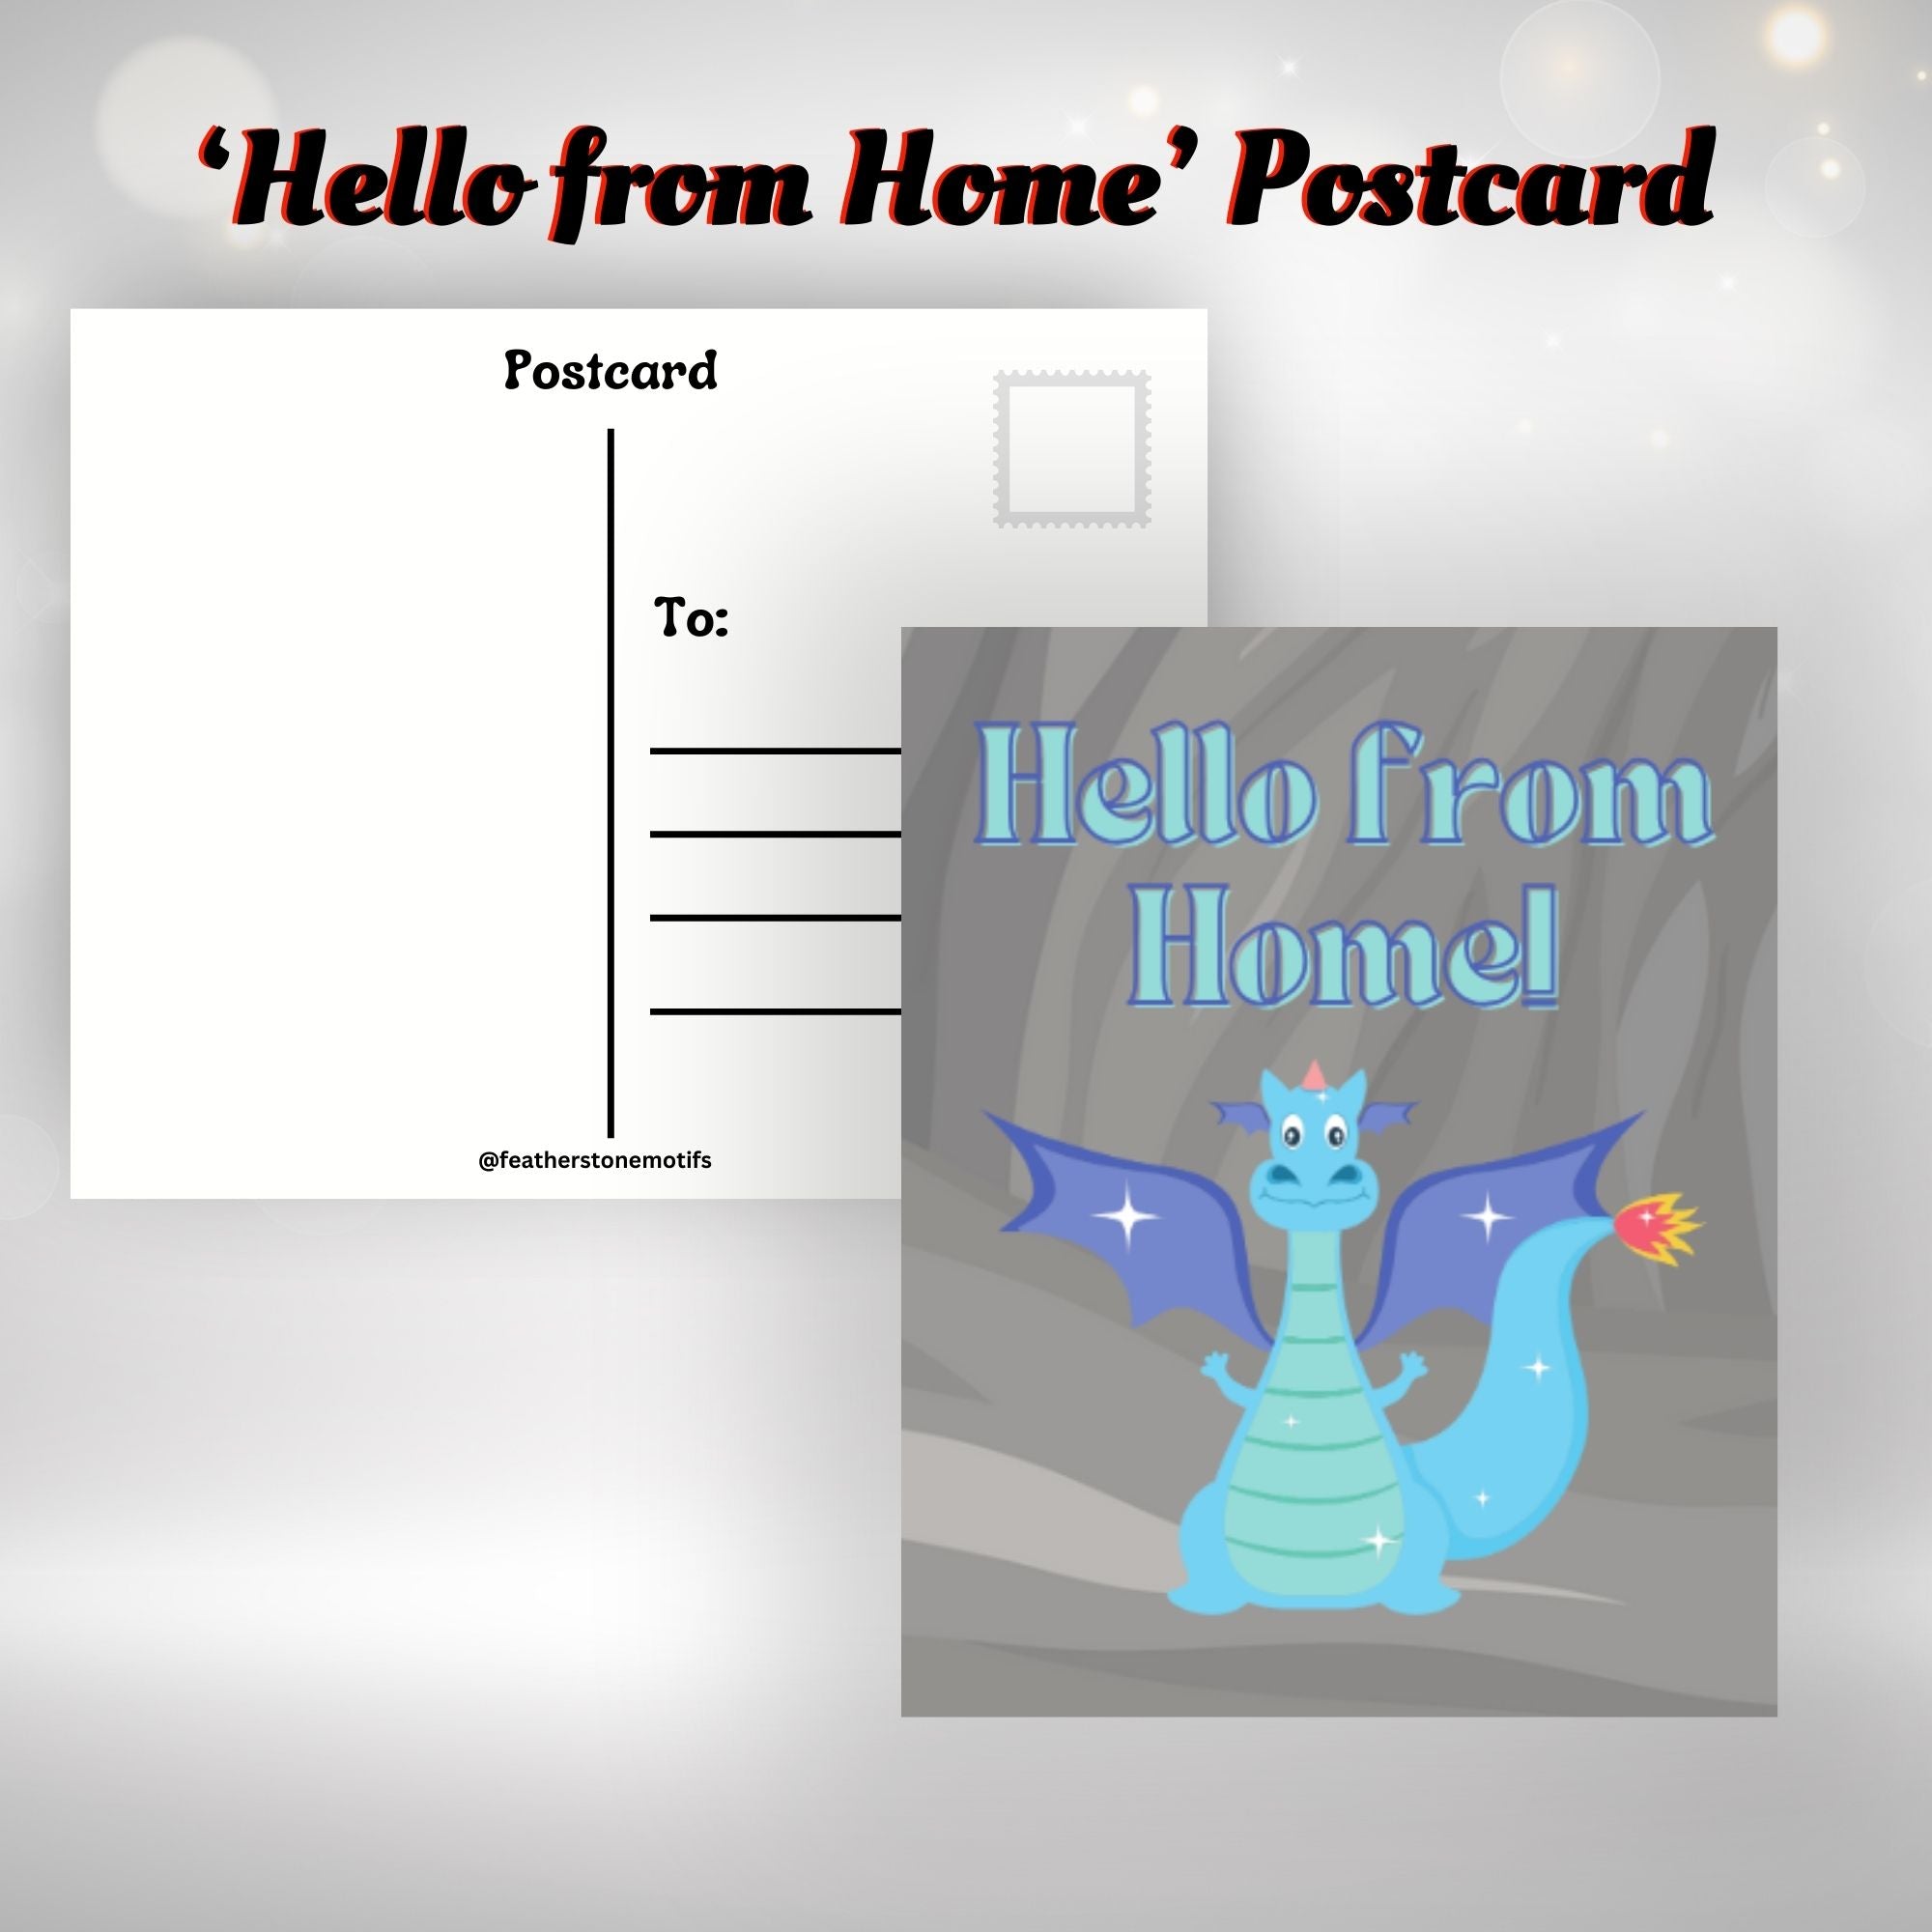 This image shows the Hello from Home postcard with a blue dragon on the front.